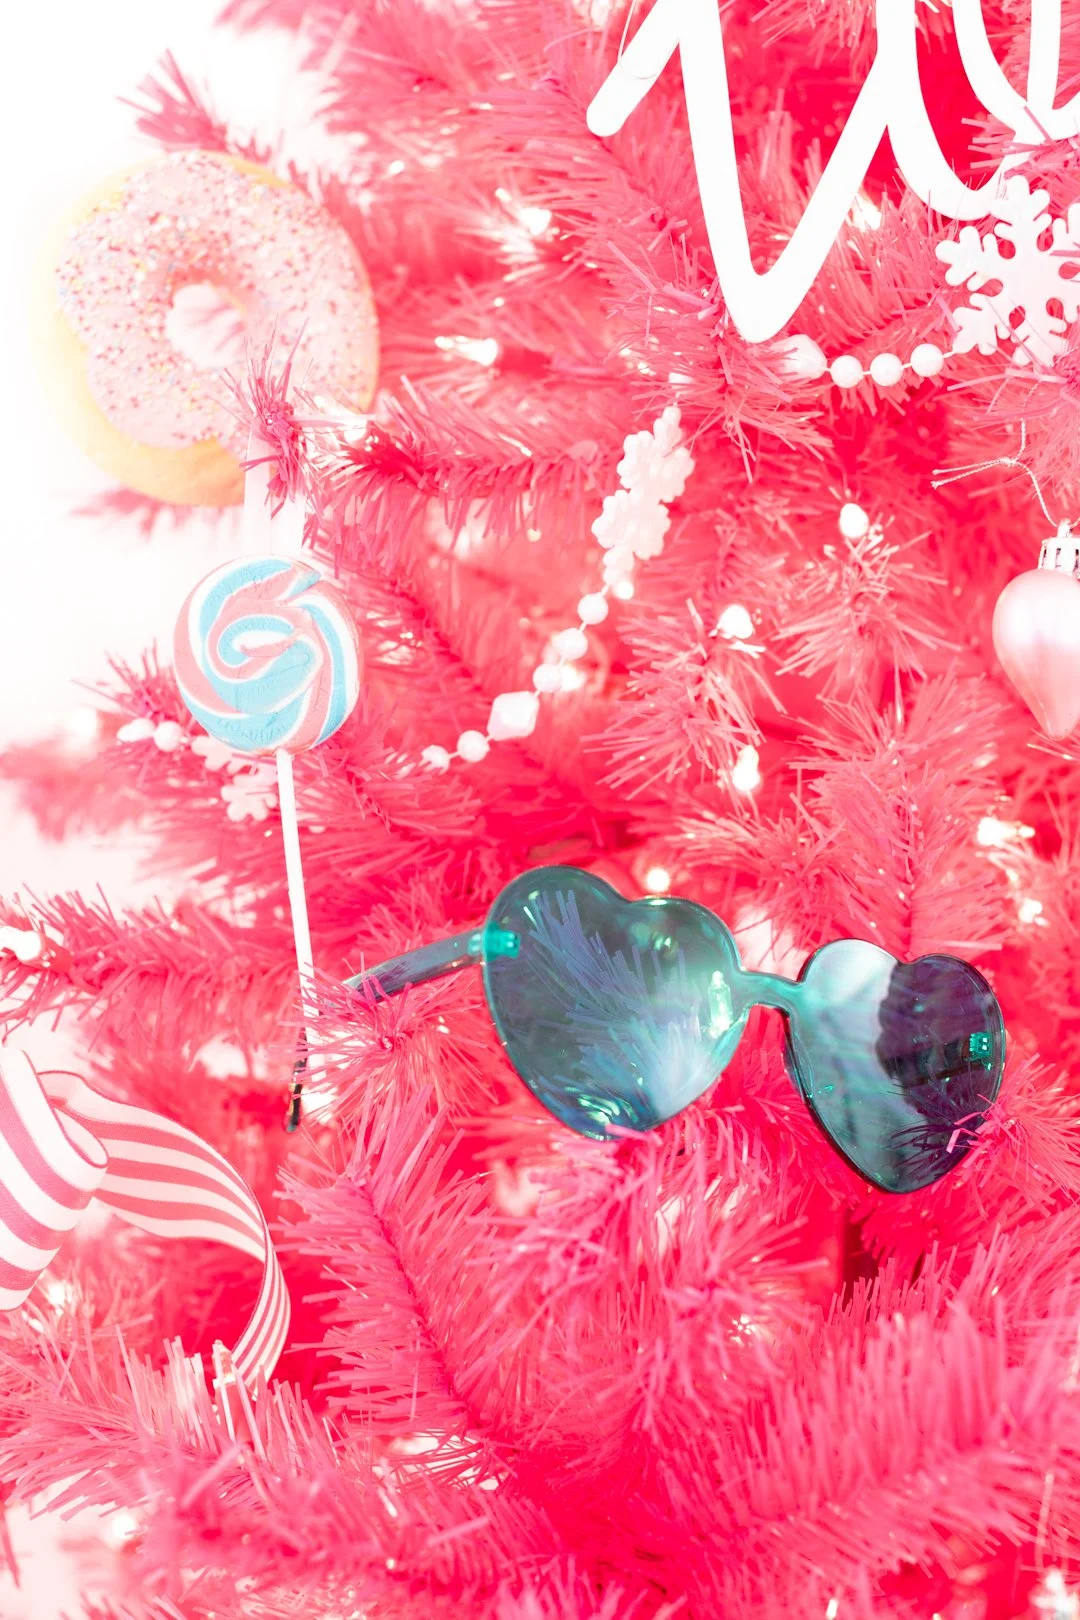 real lollipop made into an ornament